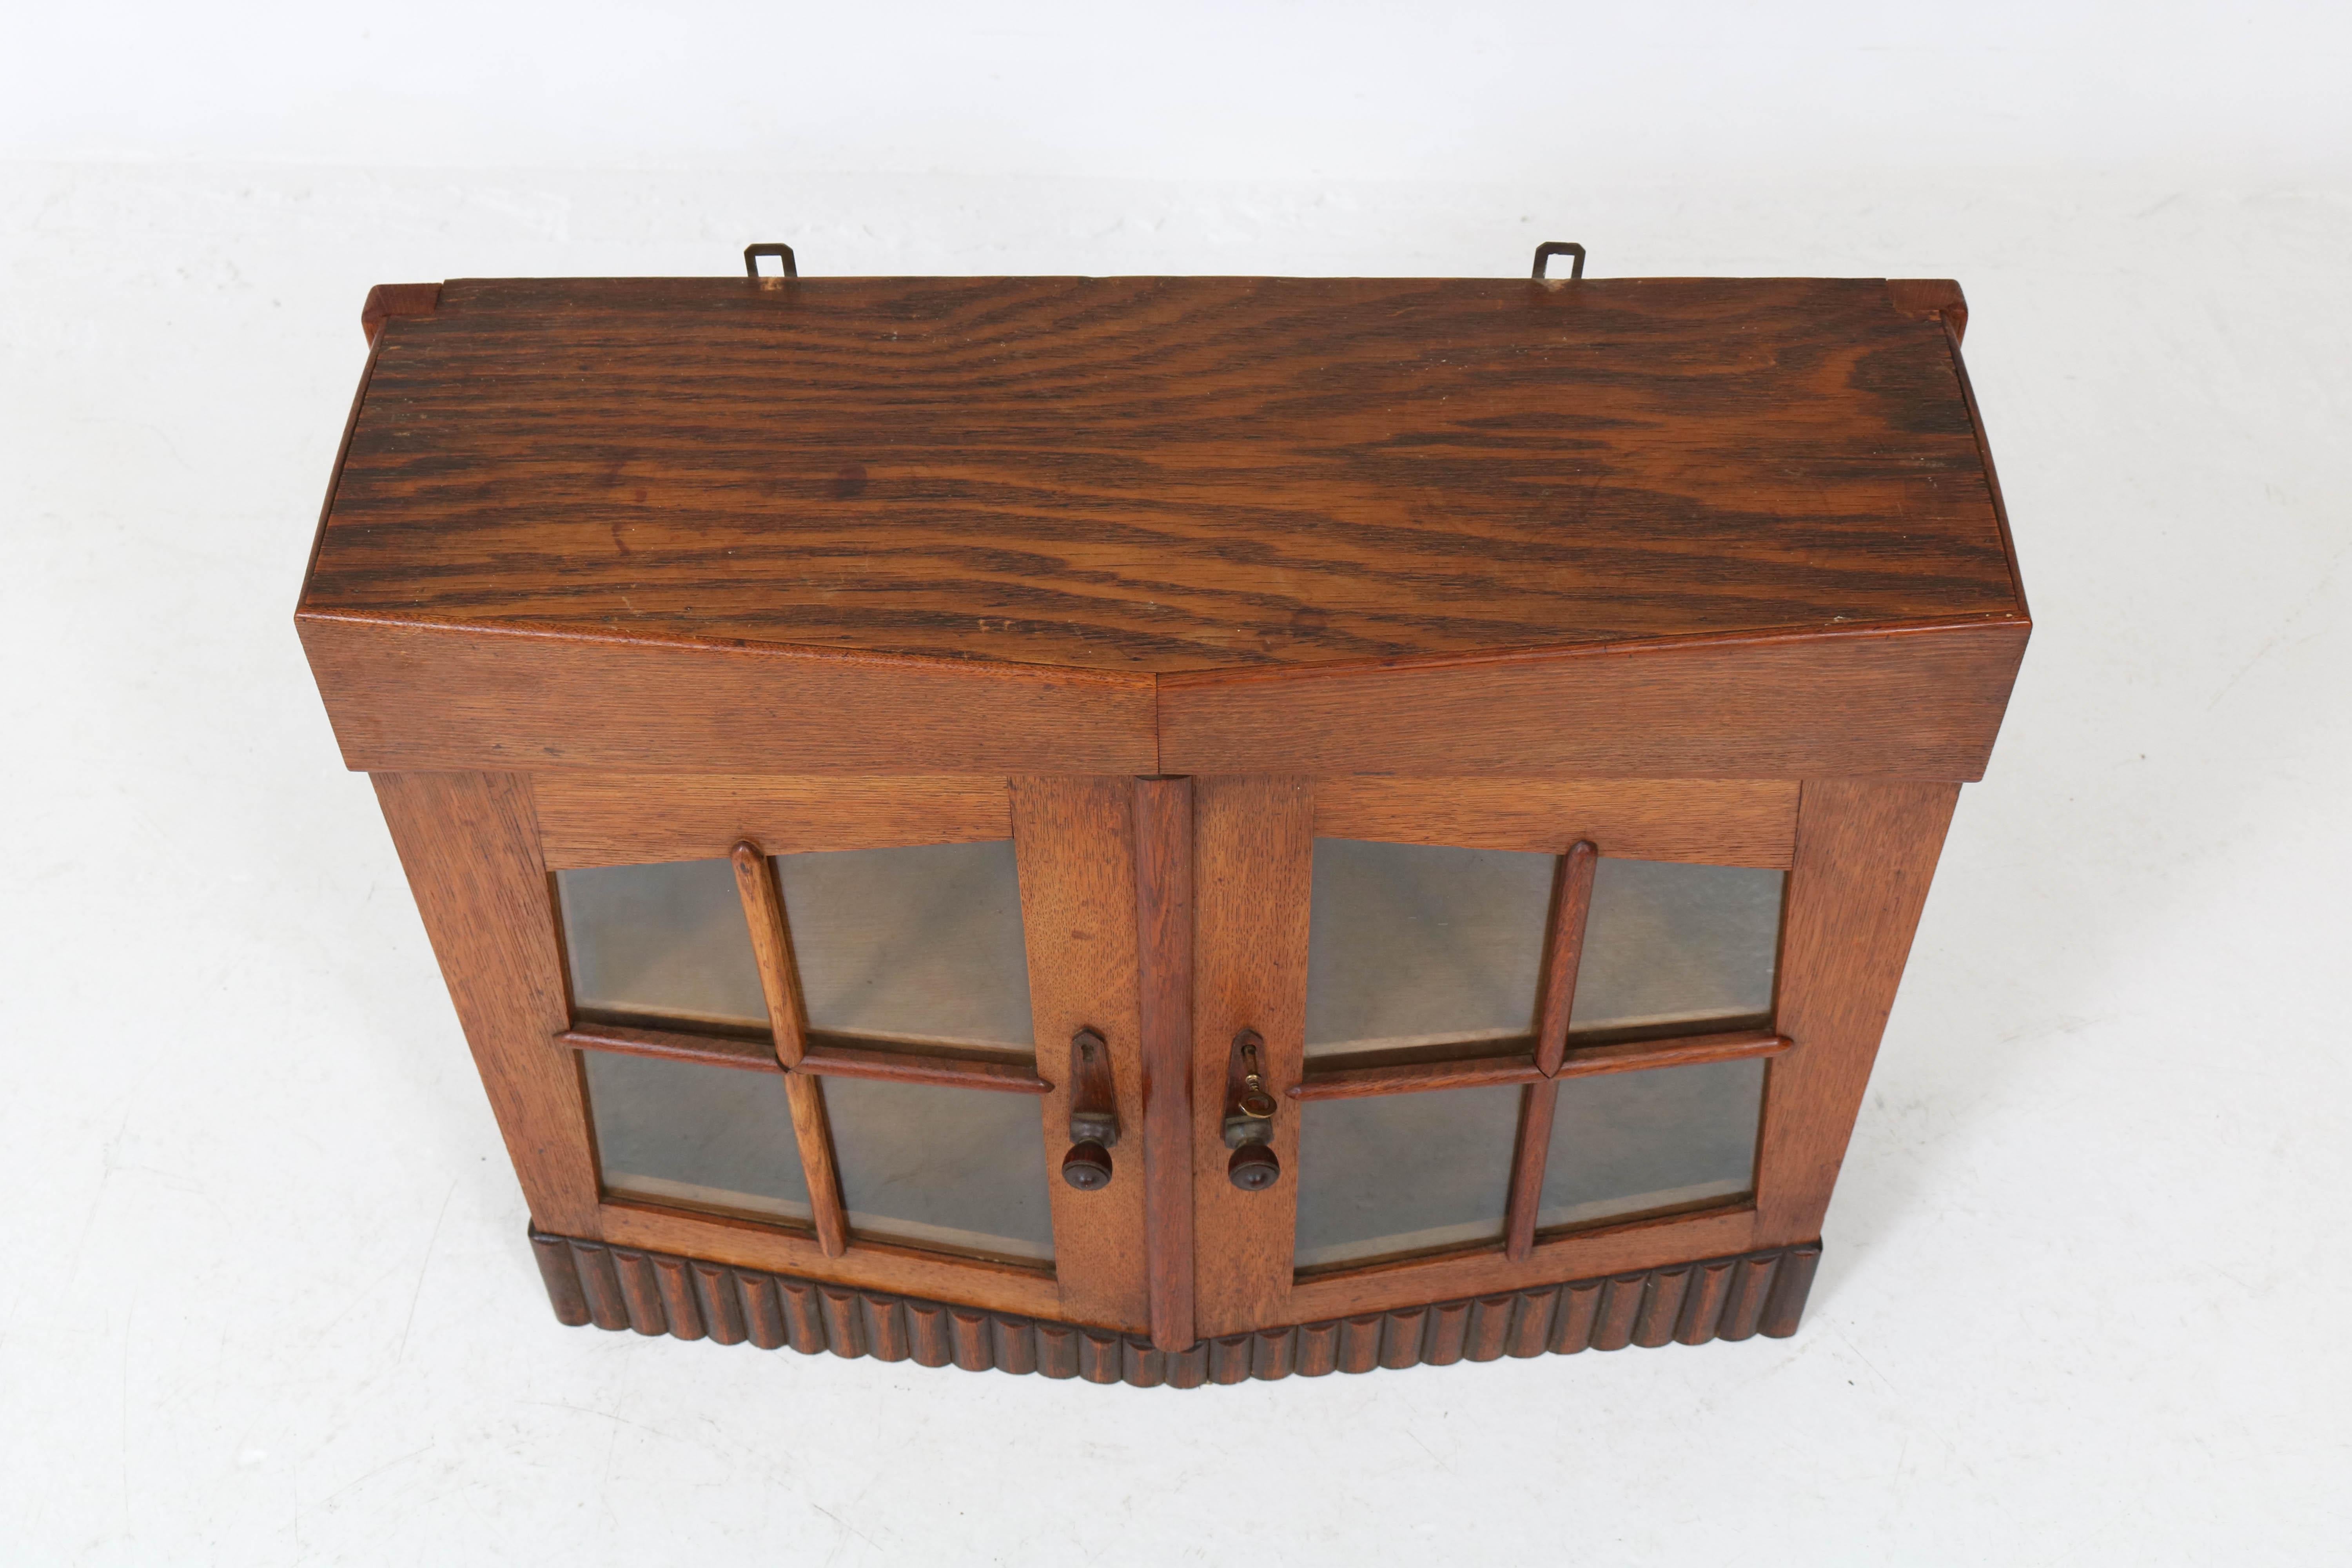 Stunning and rare Art deco Amsterdam School wall cabinet with glass doors.
Solid oak with original Macassar ebony handles.
Striking Dutch design from the twenties.
In good original condition with minor wear consistent with age and